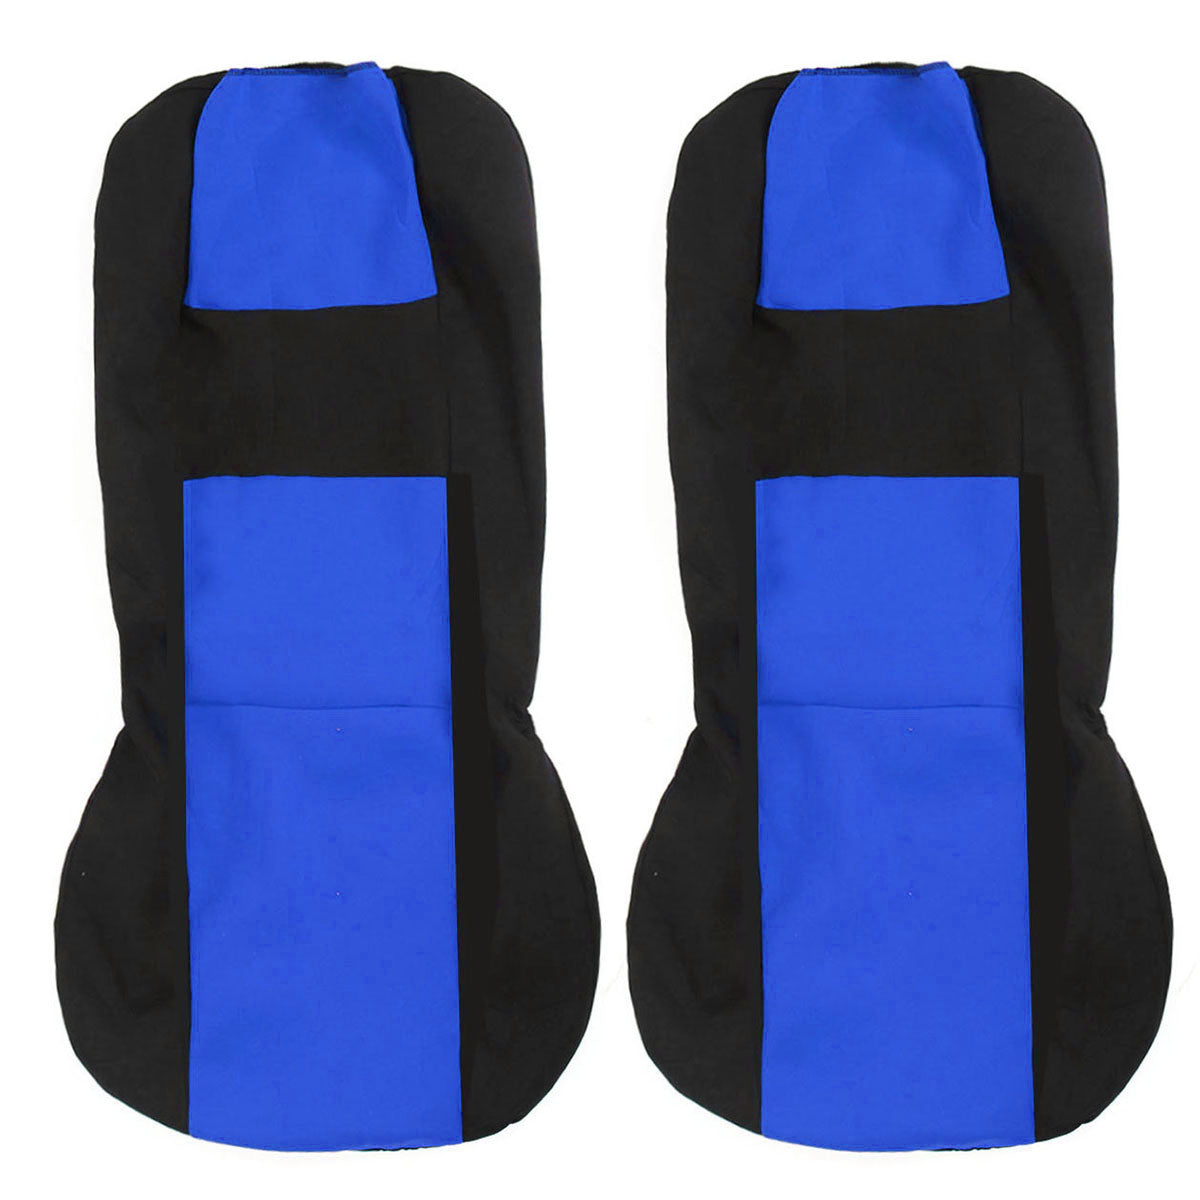 Universal Car Seat Covers Protectors Cushions Full Set Cover 4 Heads Blue+Black - Auto GoShop